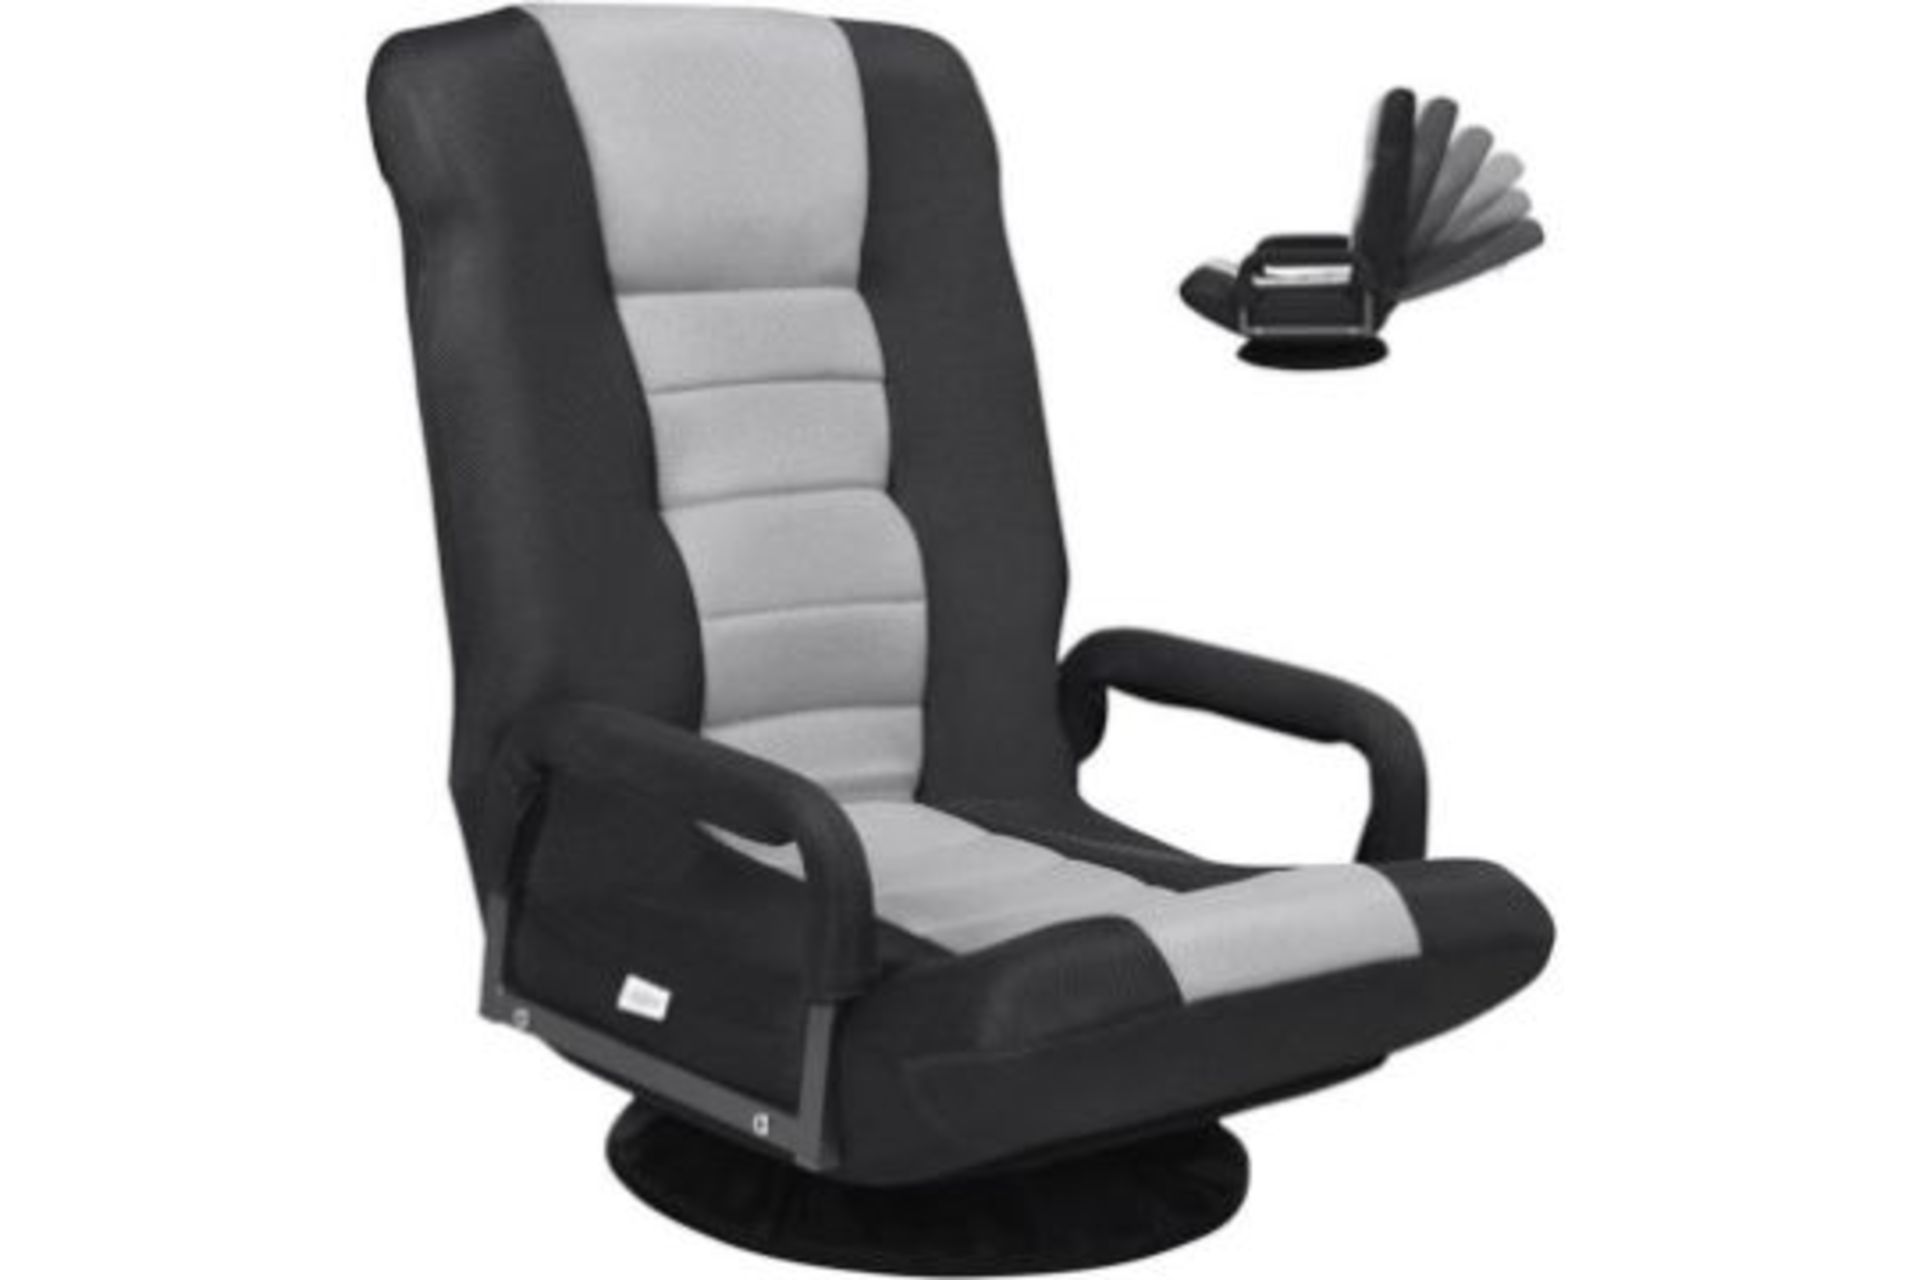 Multigot Floor Lazy Sofa Recliner, 6-Position Adjustable Gaming Chair with 360 Degree Swivel Base,